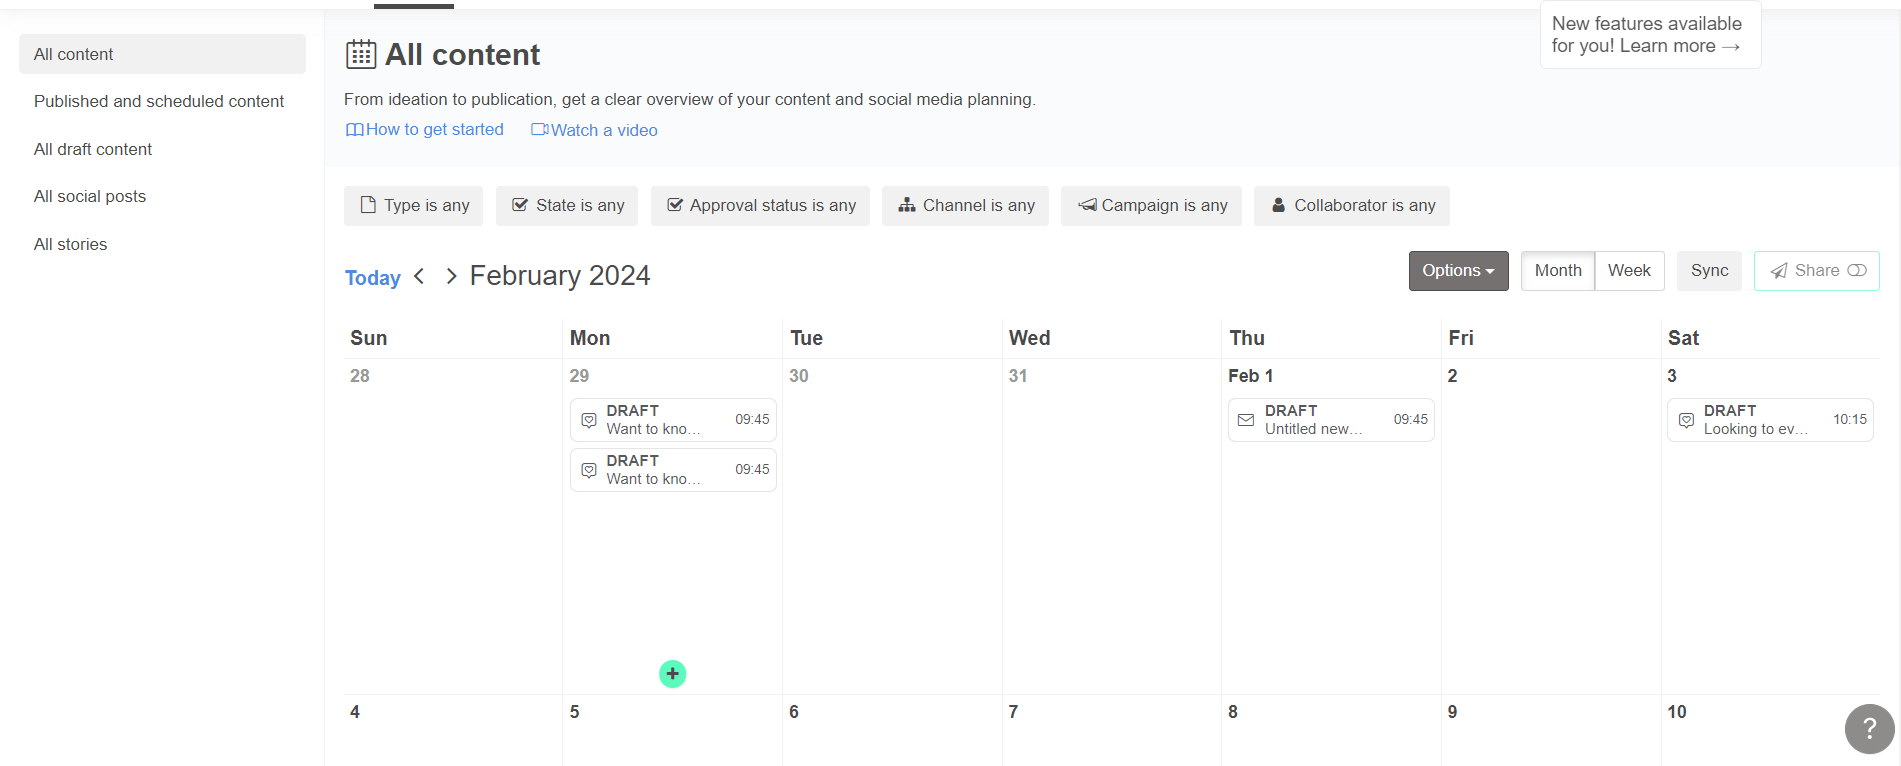 StoryChief's content calendar with All content displayed for February 2024